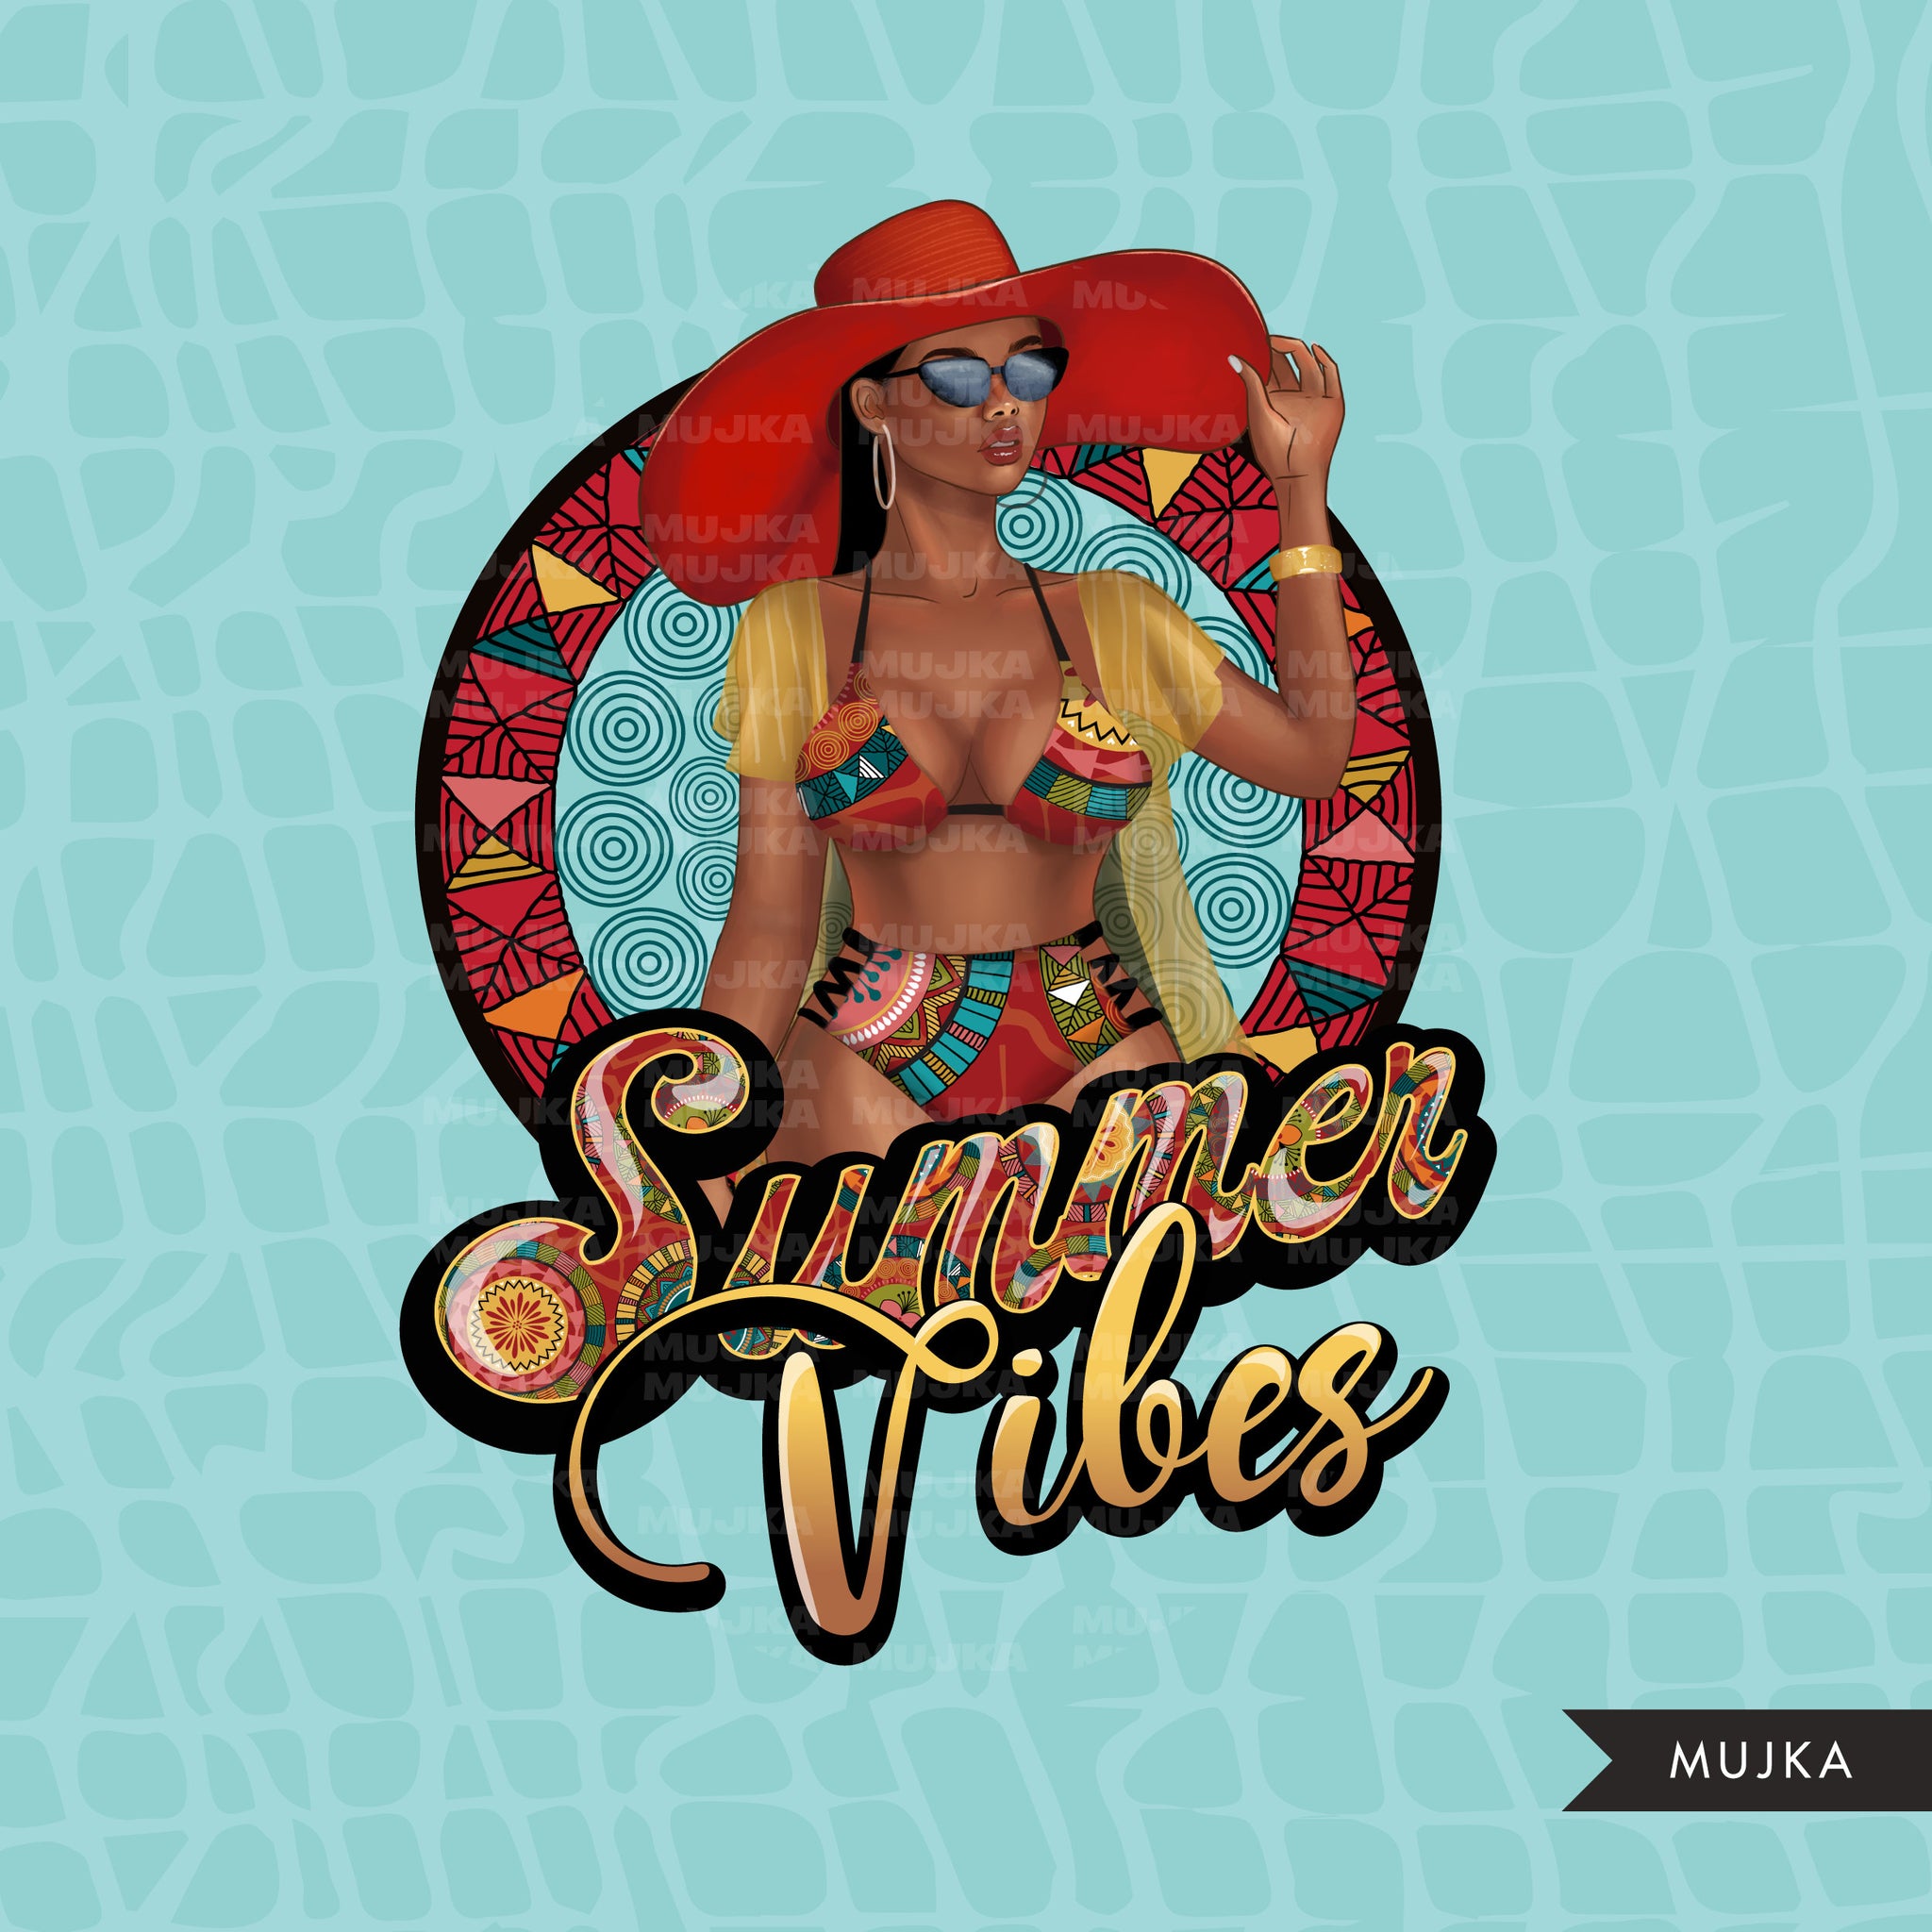 Summer Vibes PNG, Sublimation designs, Summer clipart, vacation digital papers, Beach Girls, Fashion girl clipart, black woman clipart